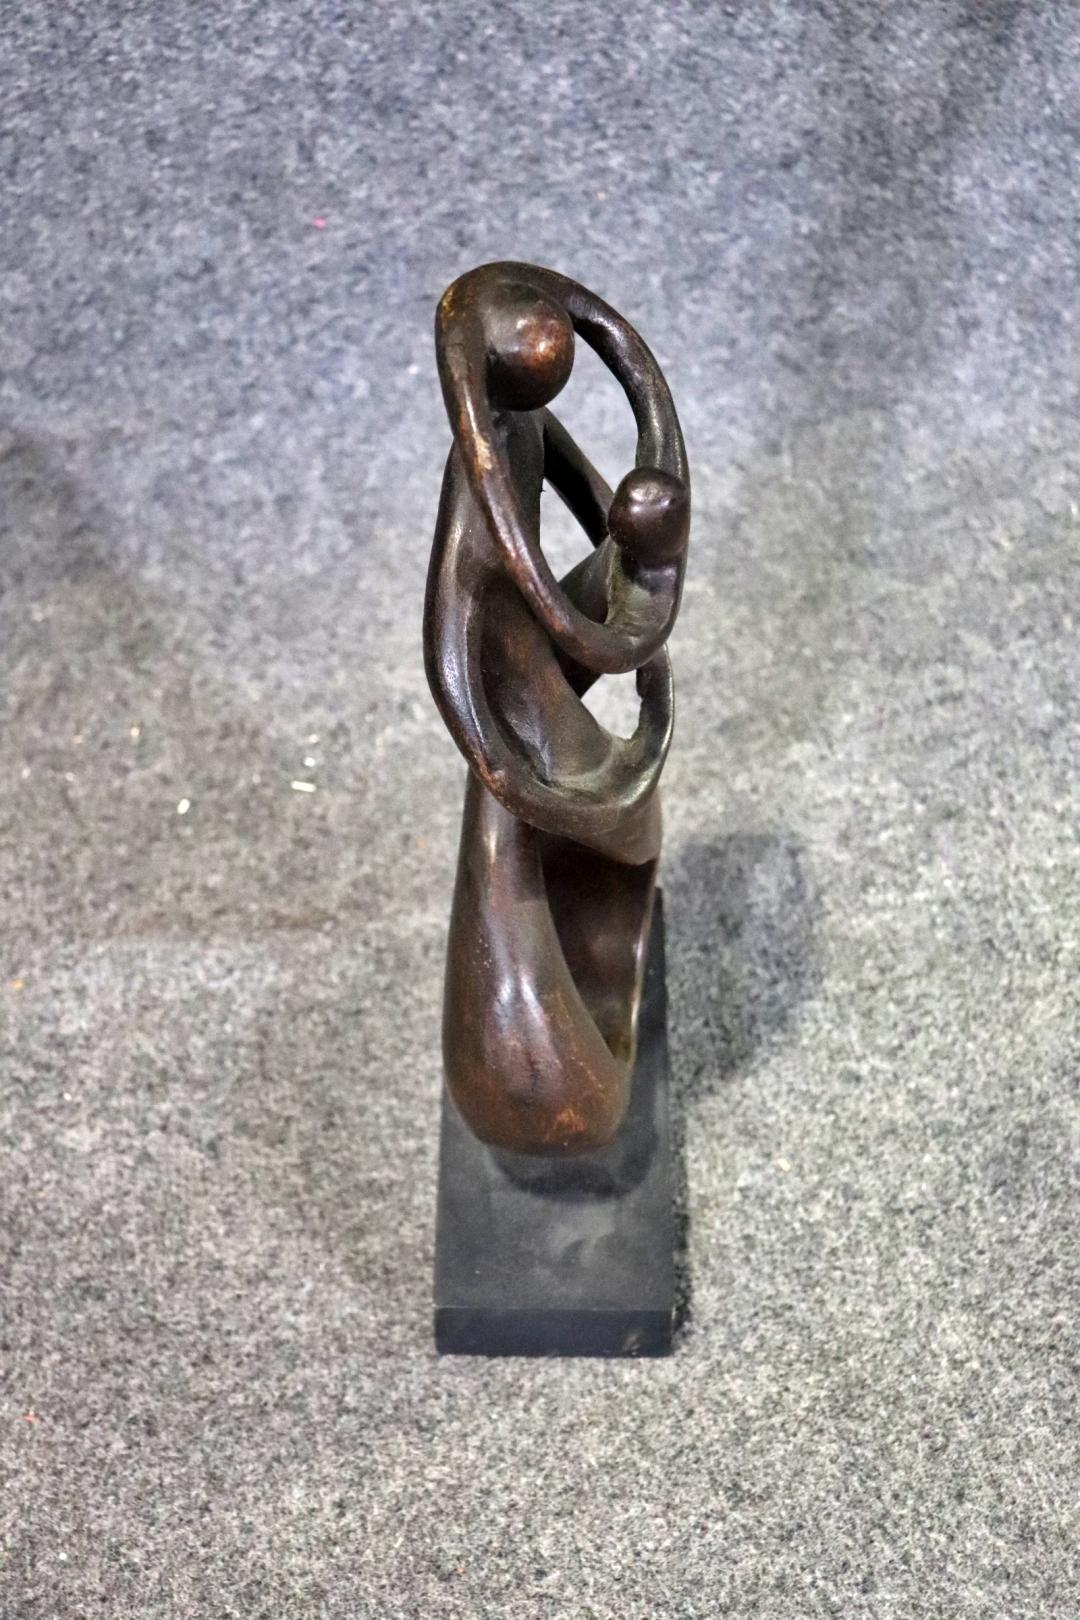 Beautifully sculpted piece of wood on pedestal. Two people intertwined in an embrace.
Please confirm location NY or NJ